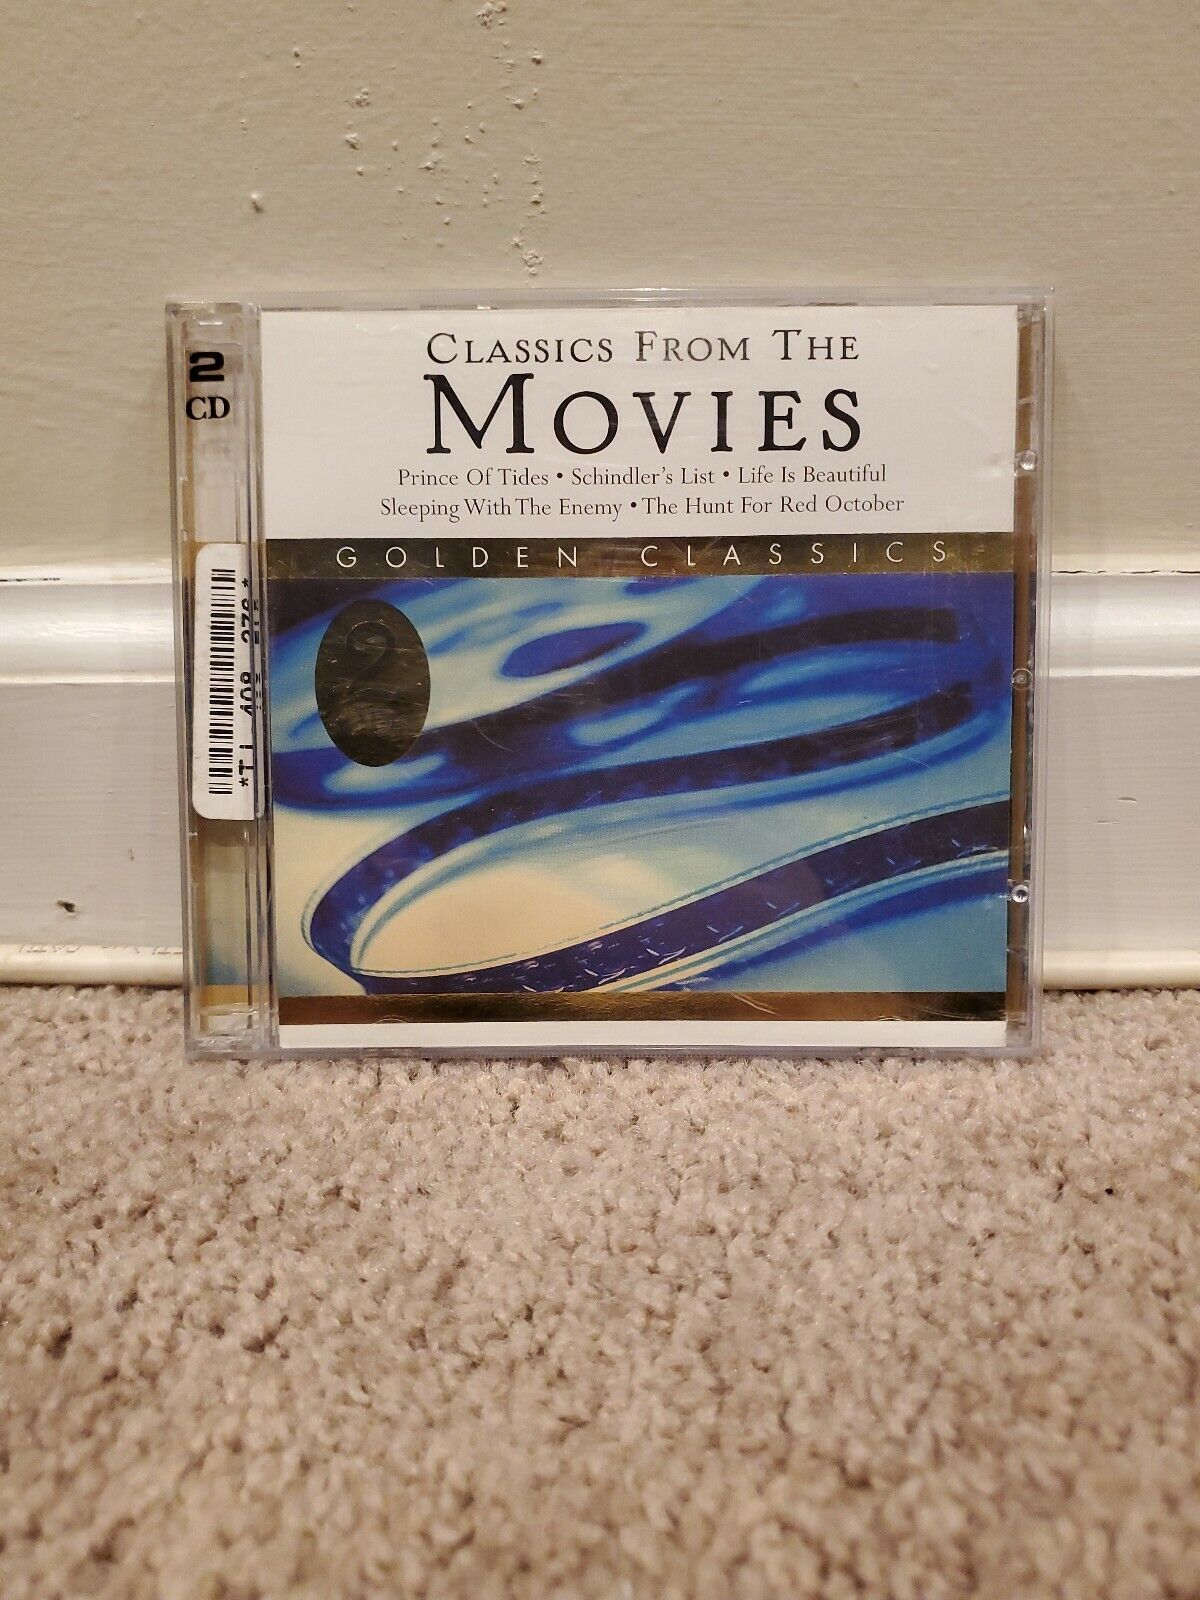 Classics from the Movies [Madacy] (2 CDs, Feb-2004, Golden Classics; Movies)